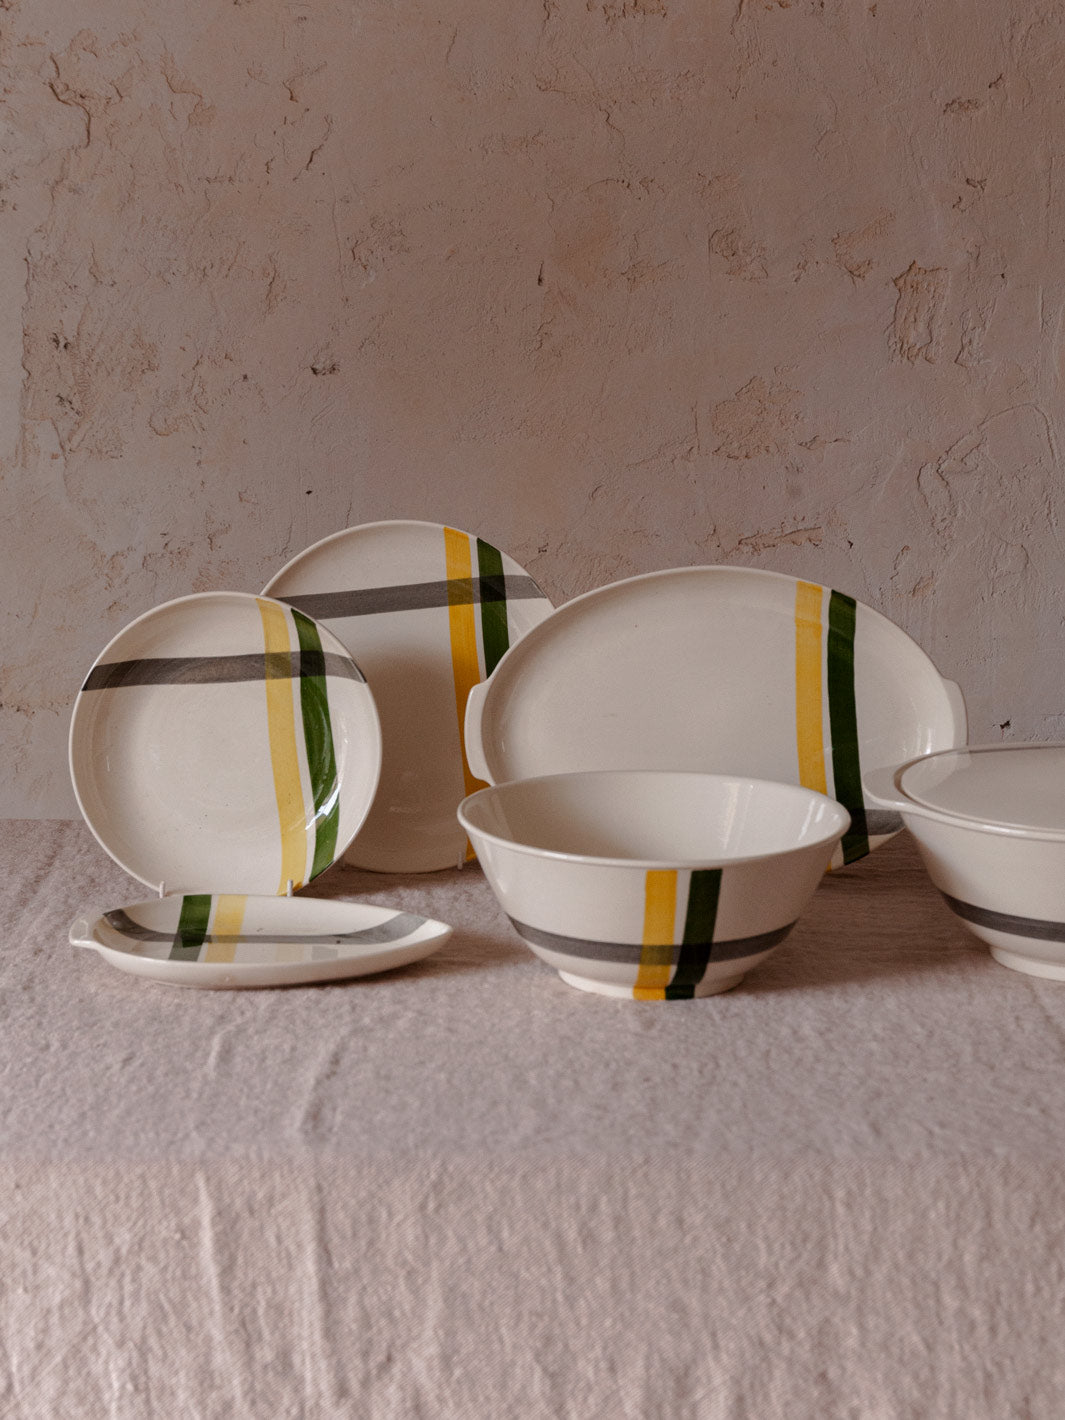 French Basque tableware from the 70s